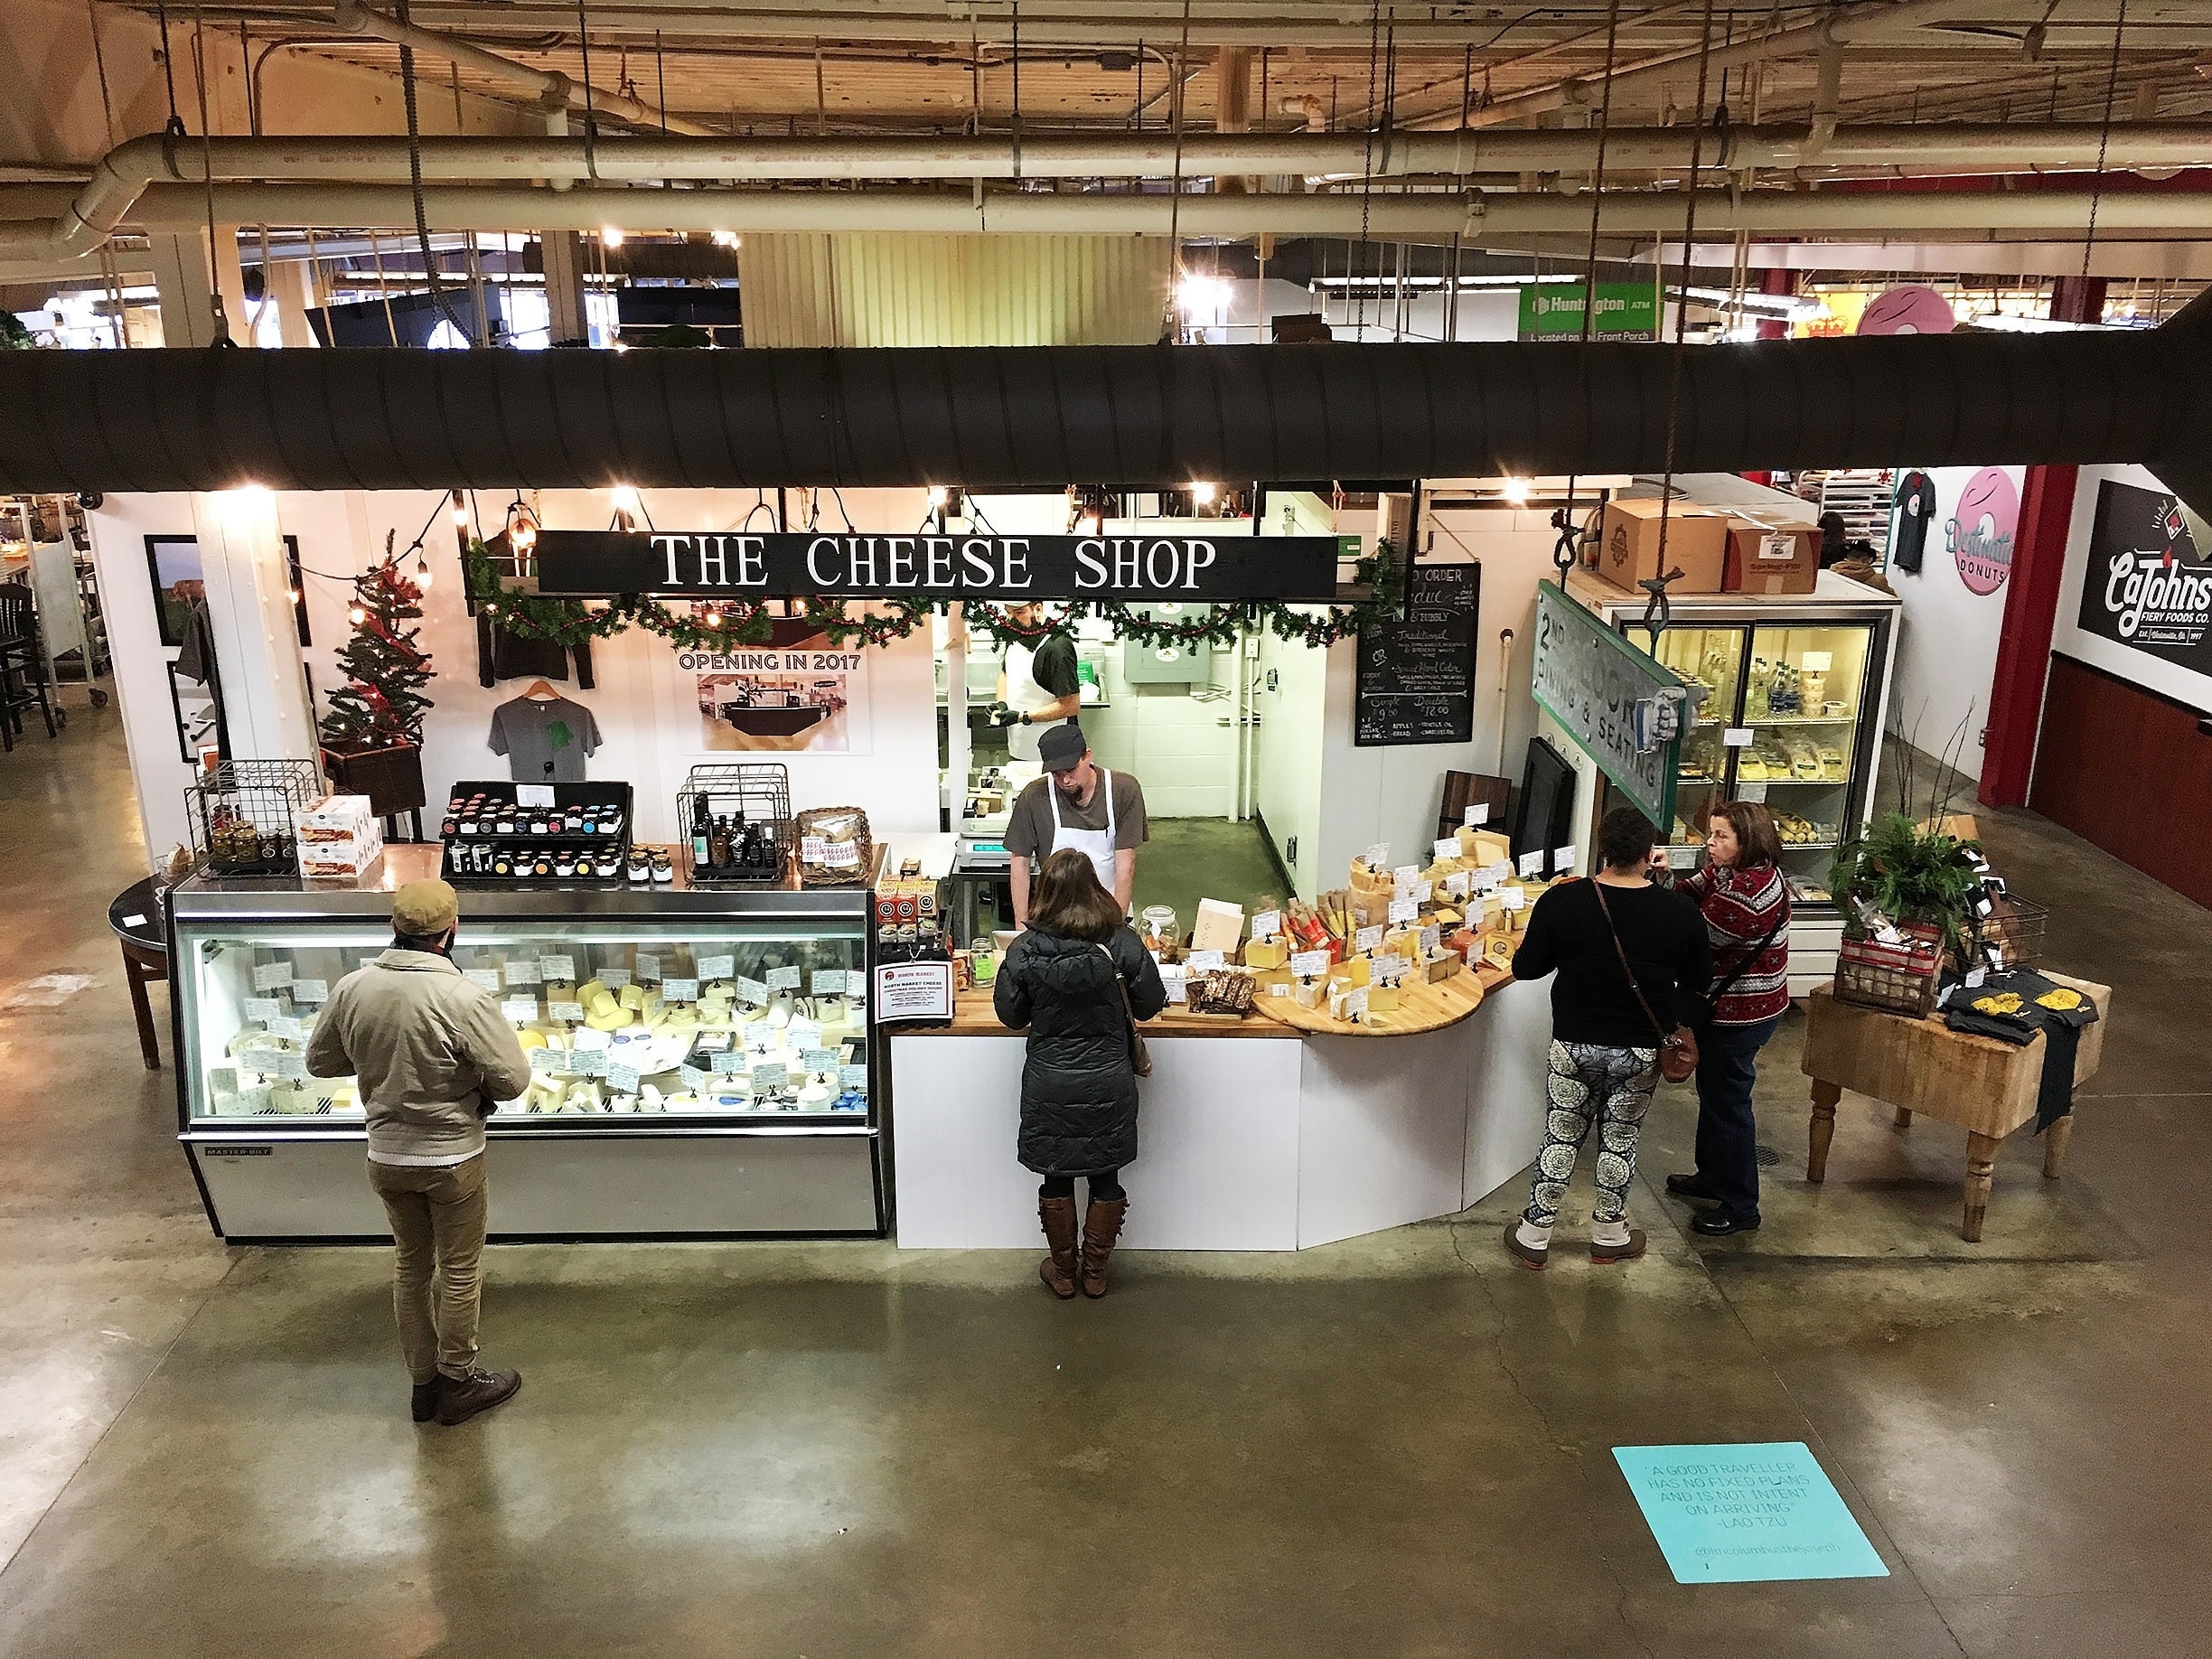 The Cheese Shop is just one of about 30 food counters in the North Market.  After picking out a few cheeses, stop by the bakery to pair them with some fresh bread.